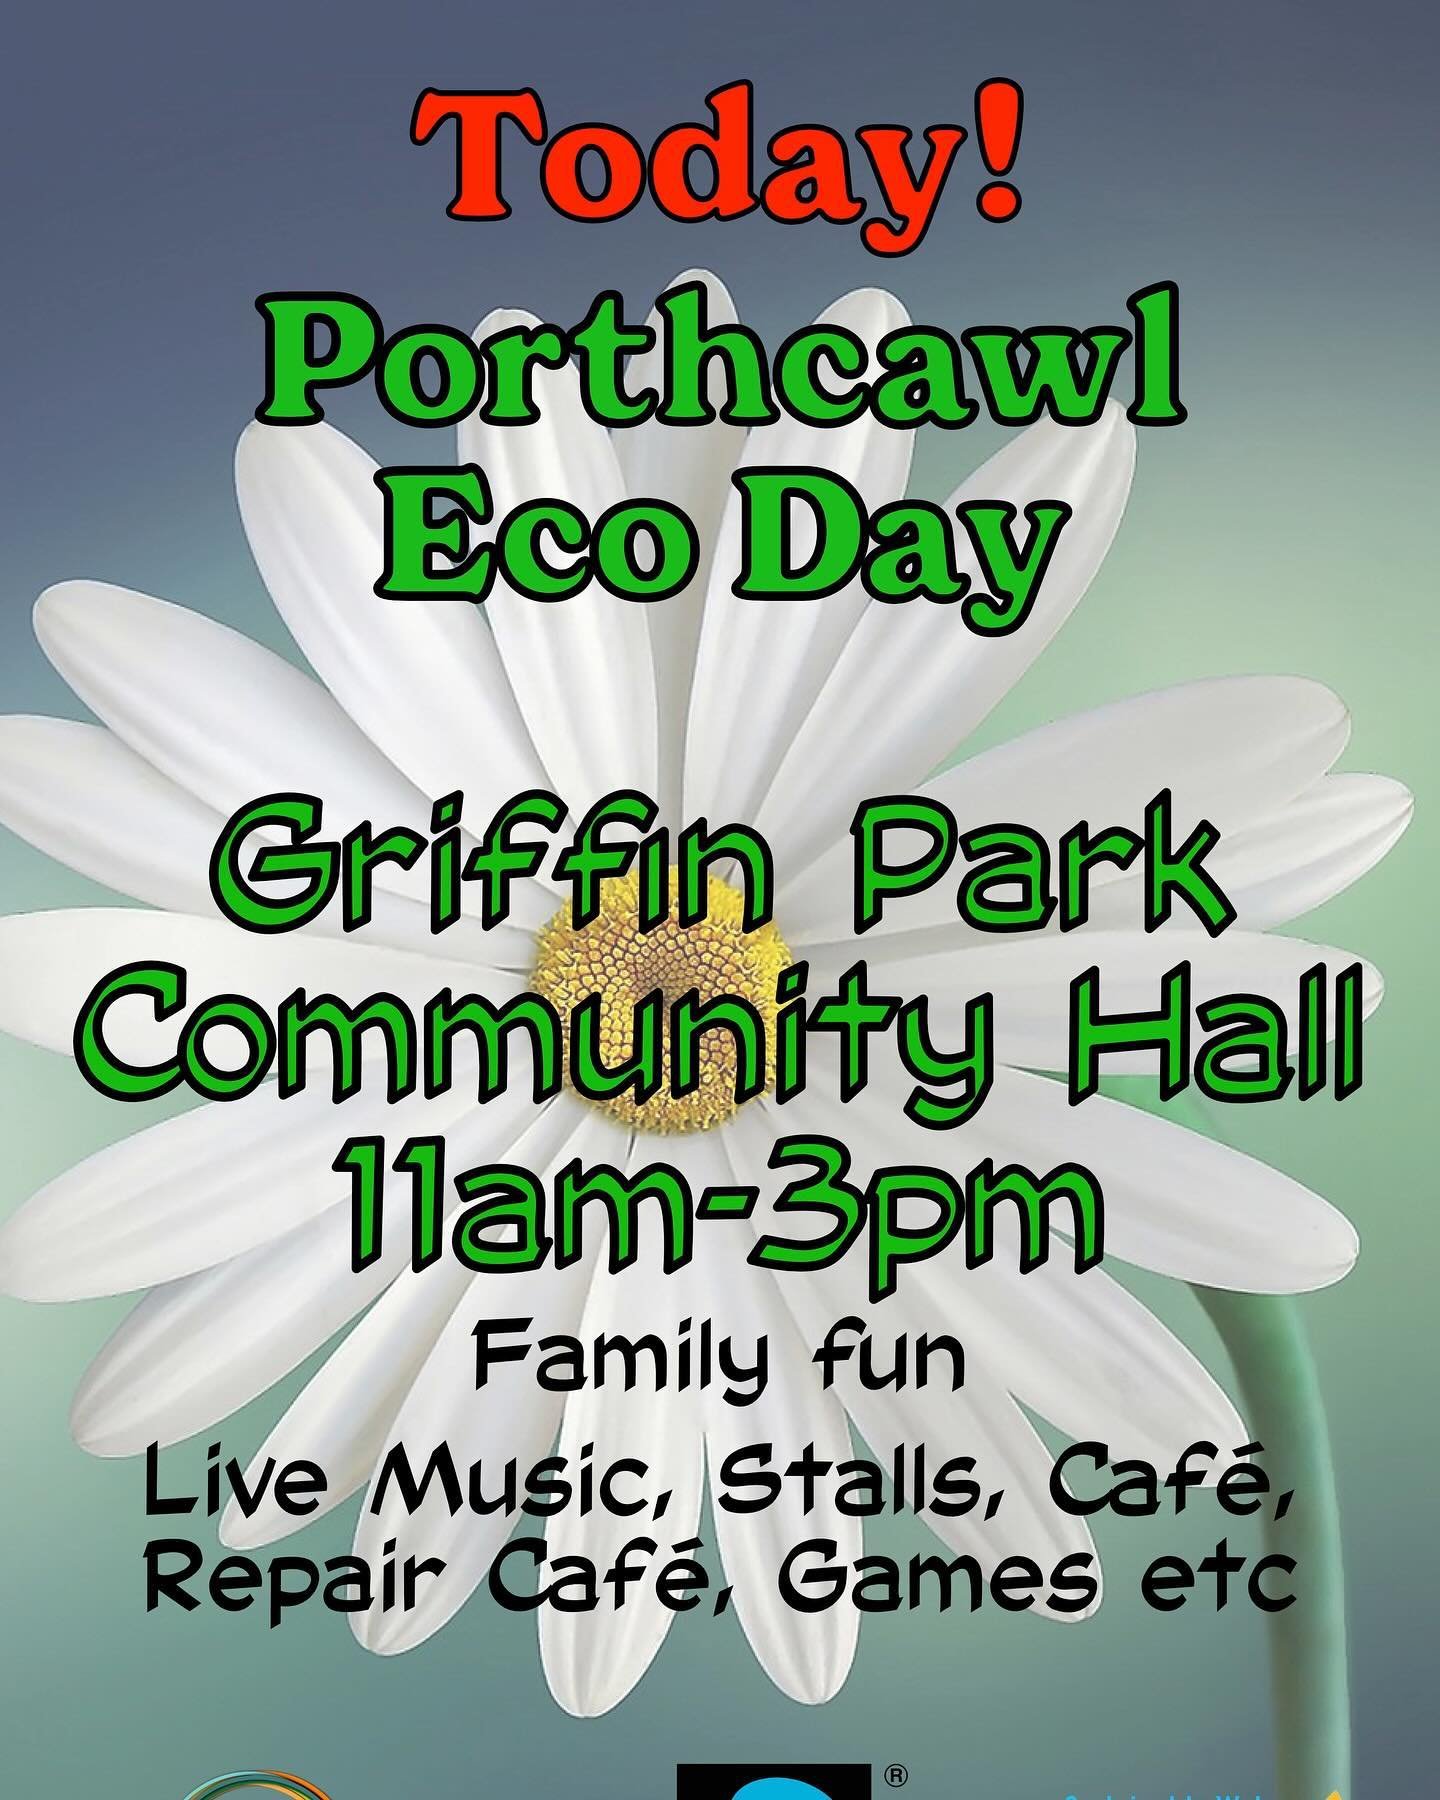 Pop along to the Porthcawl Eco Day today at Griffin Park Community Hall from 11am.